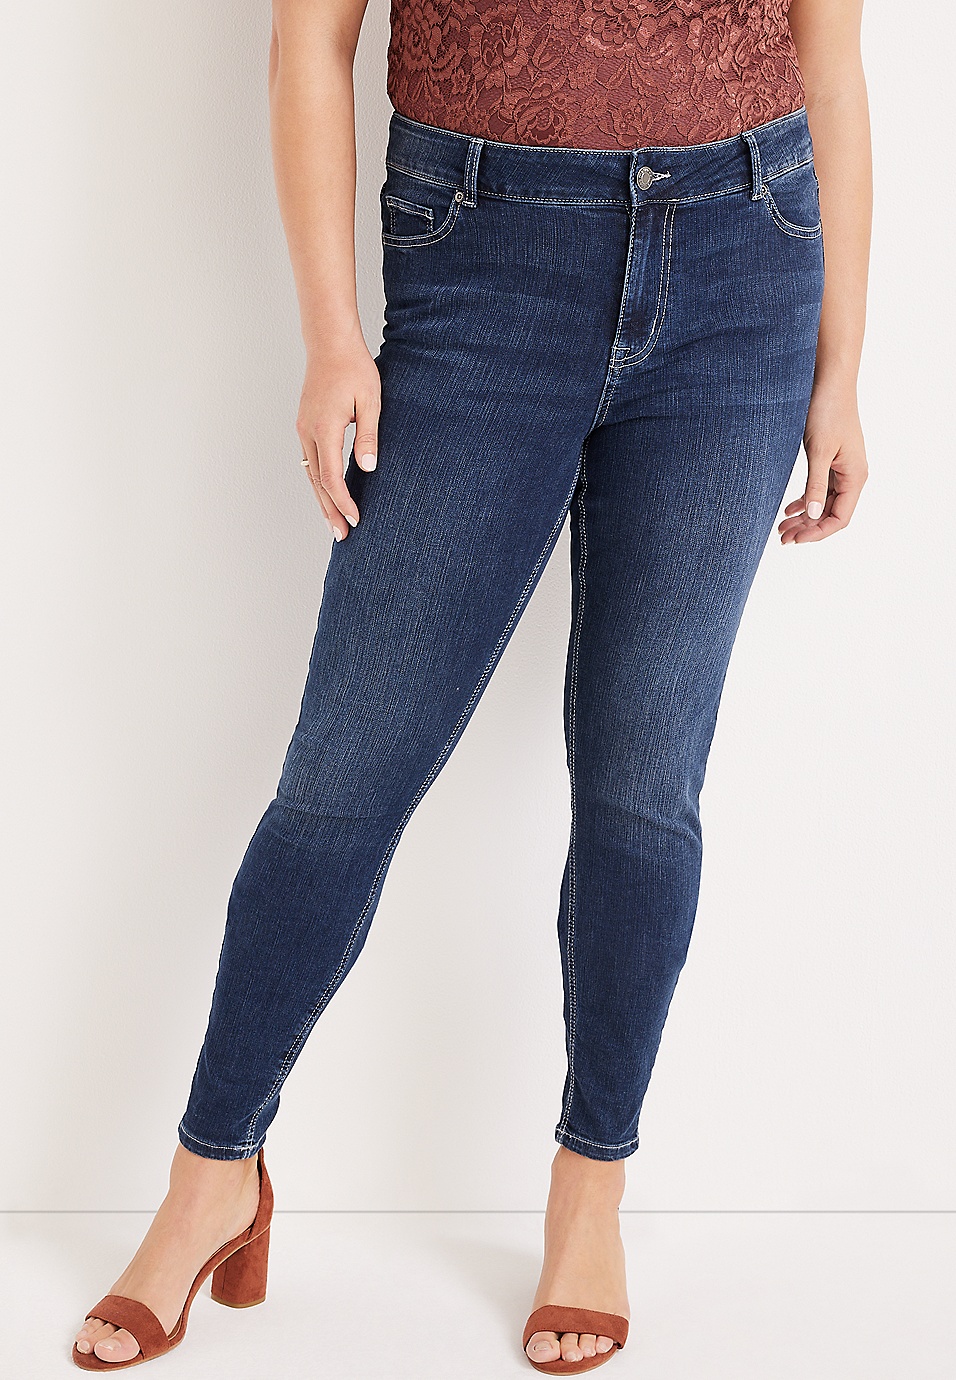 Plus Size m jeans by maurices™ Classic Skinny Mid Fit Mid Rise Jean |  maurices